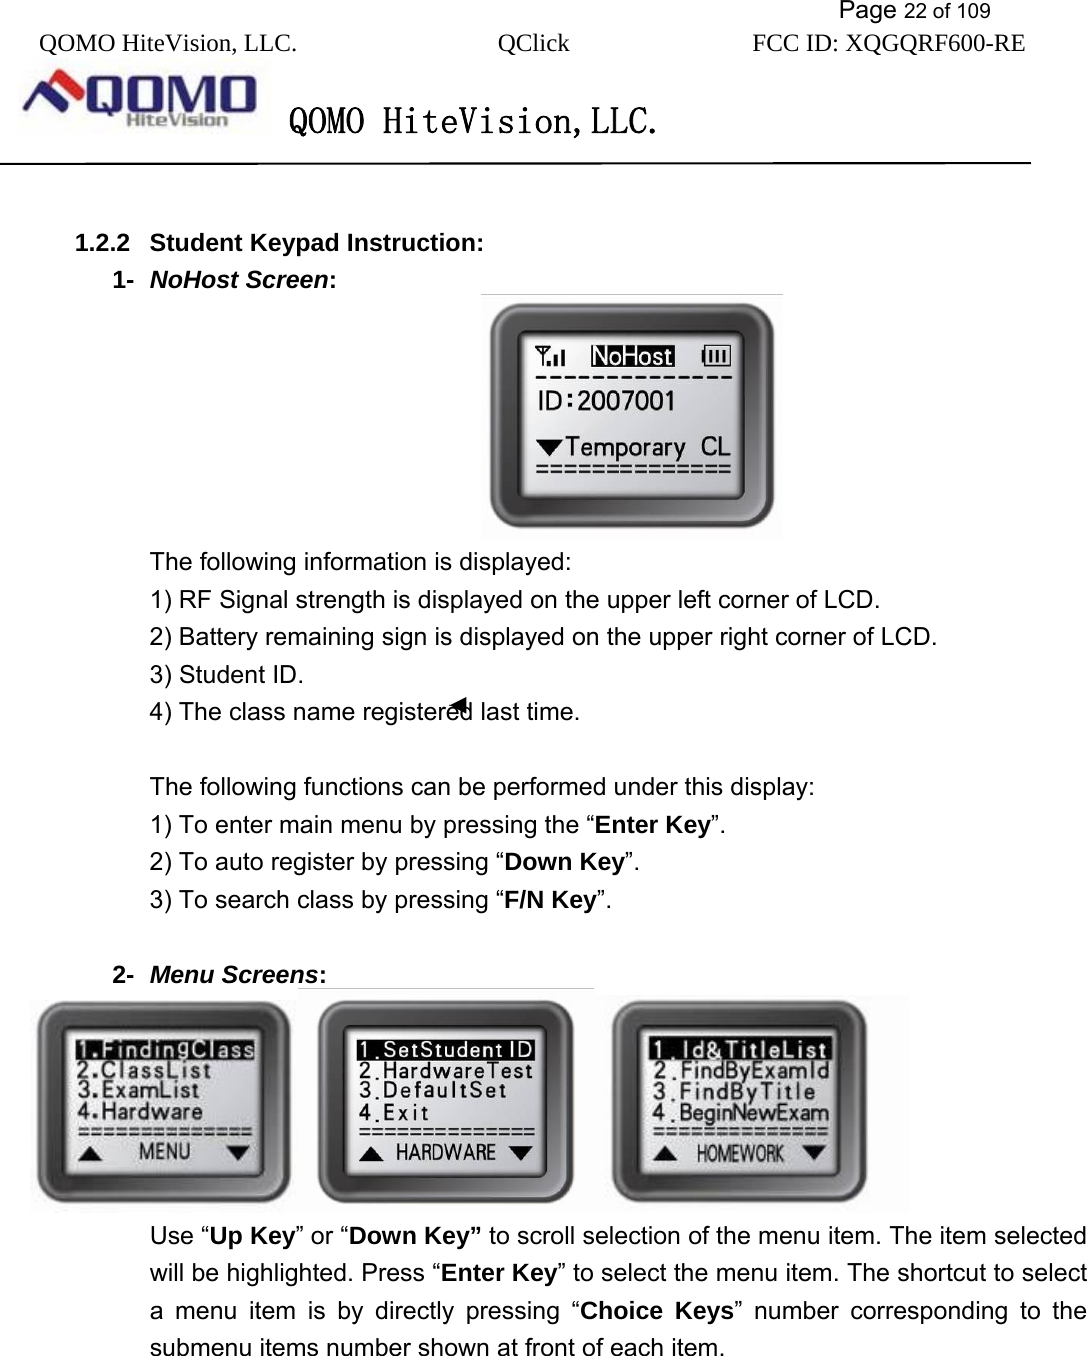           Page 22 of 109 QOMO HiteVision, LLC.  QClick        FCC ID: XQGQRF600-RE     QOMO HiteVision,LLC.    1.2.2  Student Keypad Instruction: 1-  NoHost Screen:                                The following information is displayed: 1) RF Signal strength is displayed on the upper left corner of LCD. 2) Battery remaining sign is displayed on the upper right corner of LCD. 3) Student ID. 4) The class name registered last time.    The following functions can be performed under this display: 1) To enter main menu by pressing the “Enter Key”. 2) To auto register by pressing “Down Key”. 3) To search class by pressing “F/N Key”.  2-  Menu Screens:   Use “Up Key” or “Down Key” to scroll selection of the menu item. The item selected will be highlighted. Press “Enter Key” to select the menu item. The shortcut to select a menu item is by directly pressing “Choice Keys” number corresponding to the submenu items number shown at front of each item. 